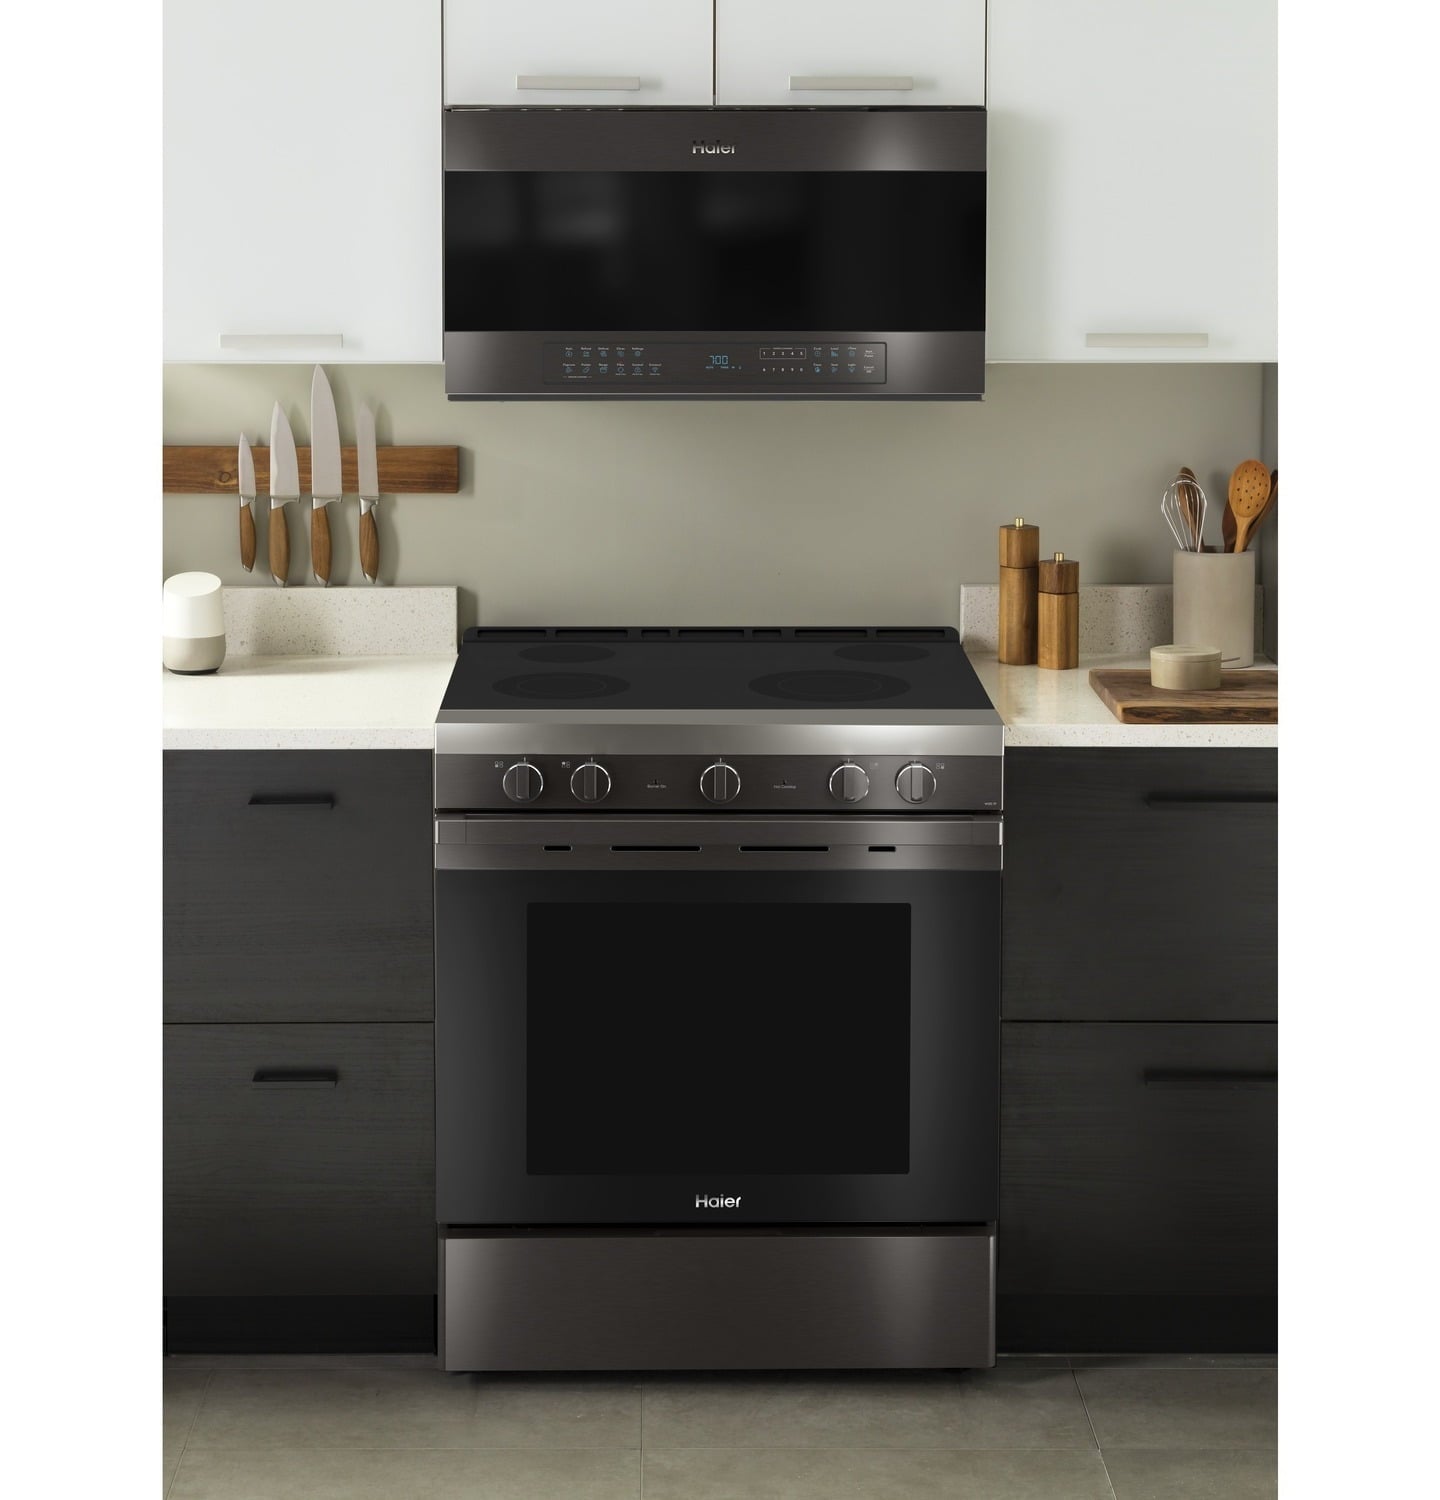 Haier QSS740BNTS 30" Smart Slide-In Electric Range With Convection